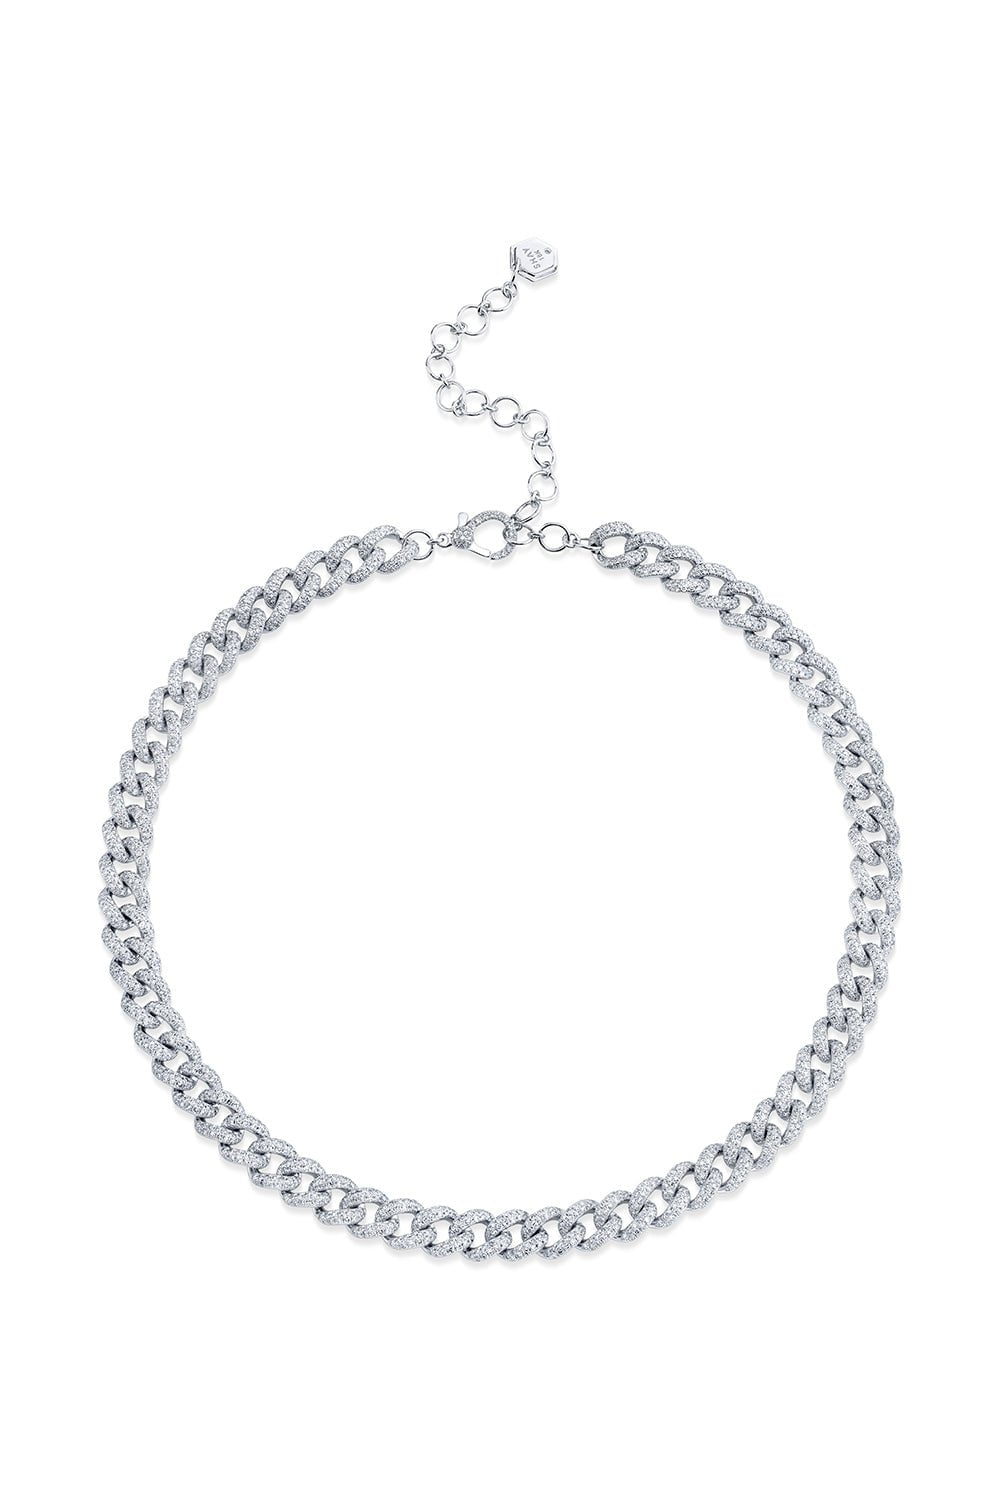 SHAY JEWELRY-Full Pave Link Necklace-WHITE GOLD